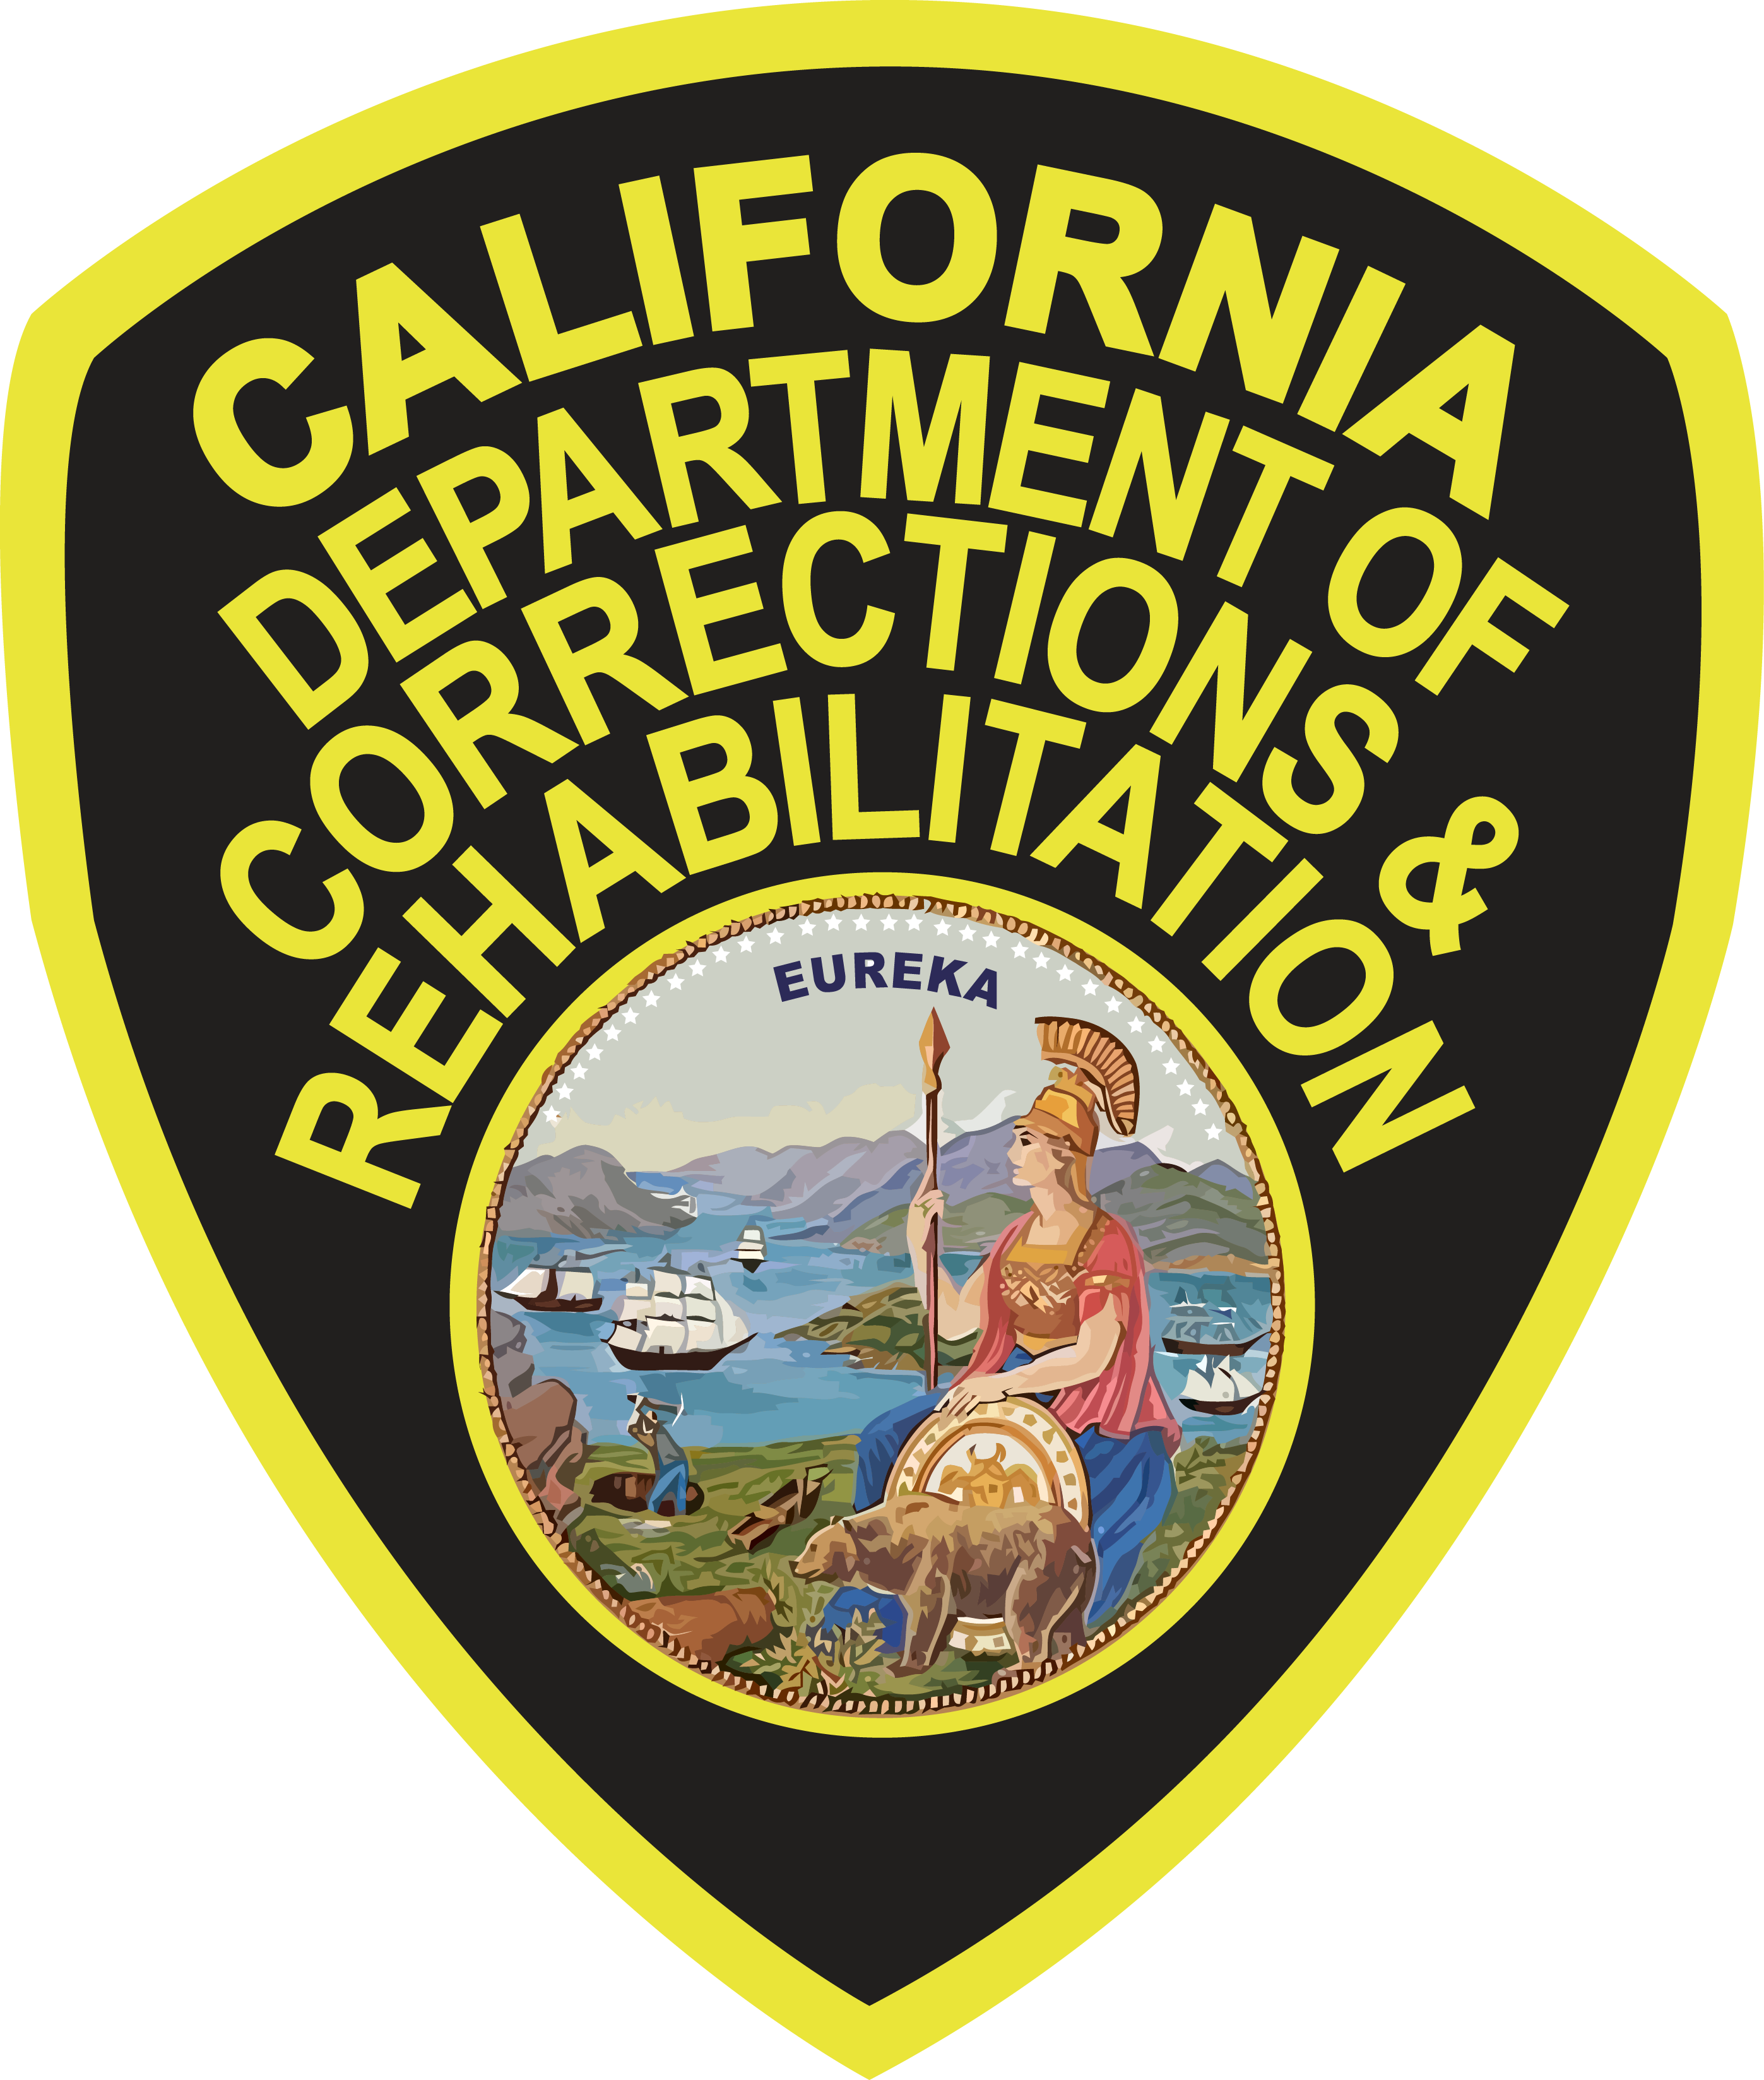 California Department of Corrections and Rehabilitation, the largest state criminal justice agency in the United States, implements eSOPH background investigation system